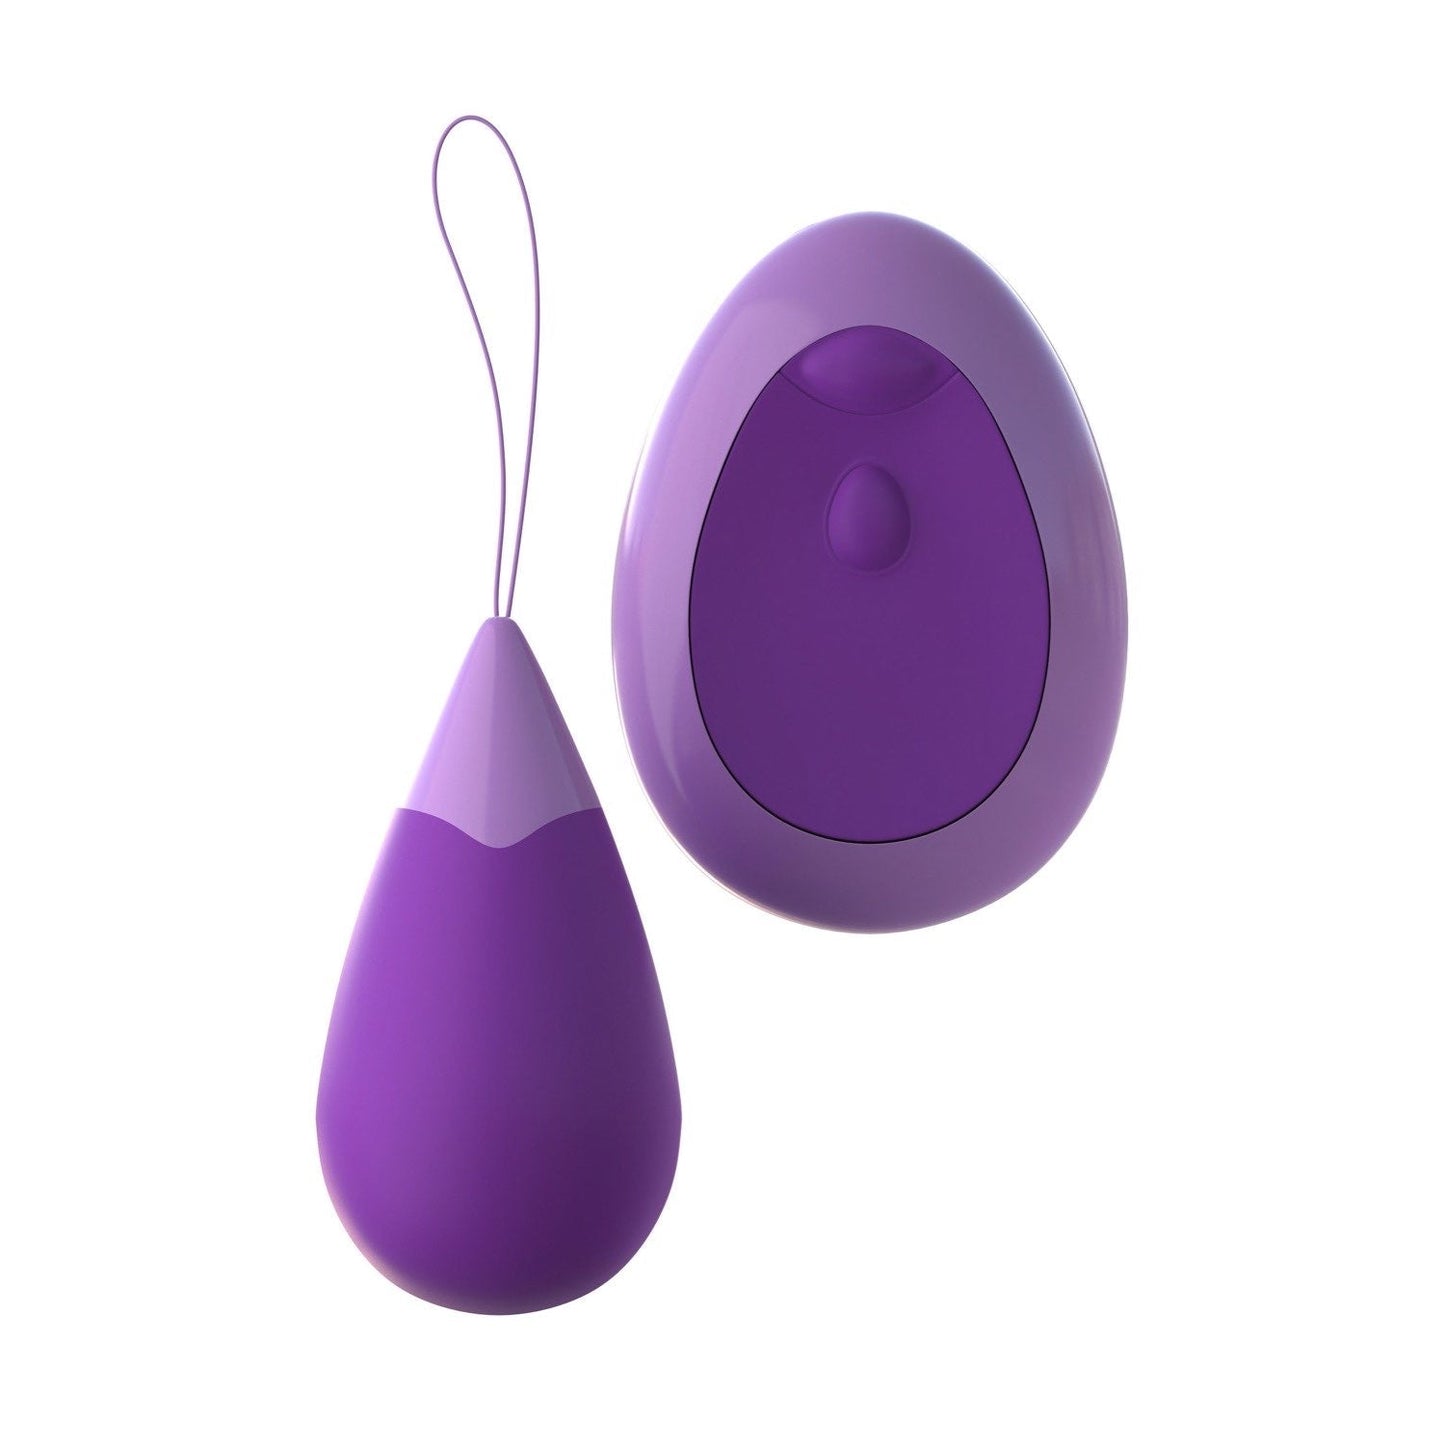 Remote Kegel Excite-Her - Purple USB Rechargeable Vibrating Kegel Trainer with Wireless Remote